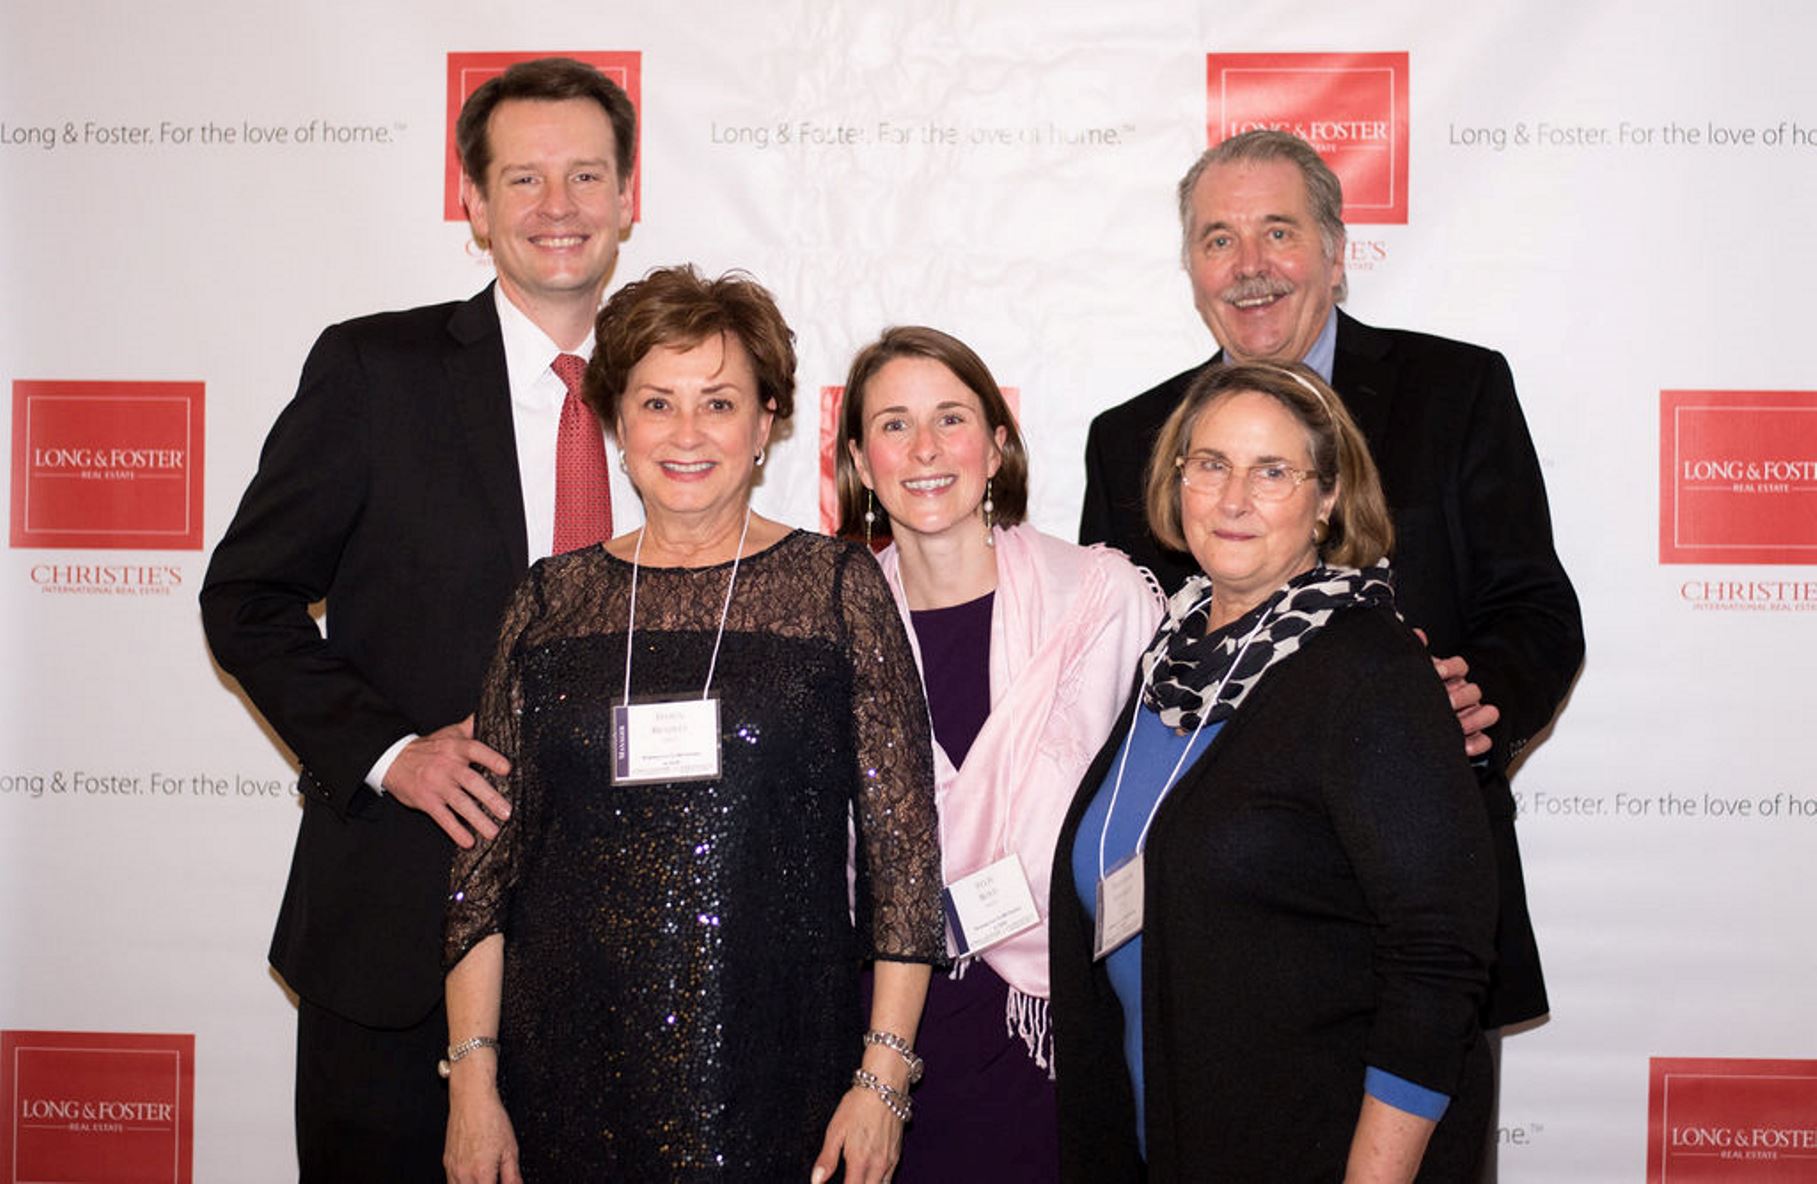 Left to right, Brian Haug, Dawn Bradley, Ellie Boyd, Marianne Donahue, and Jeff Donahue